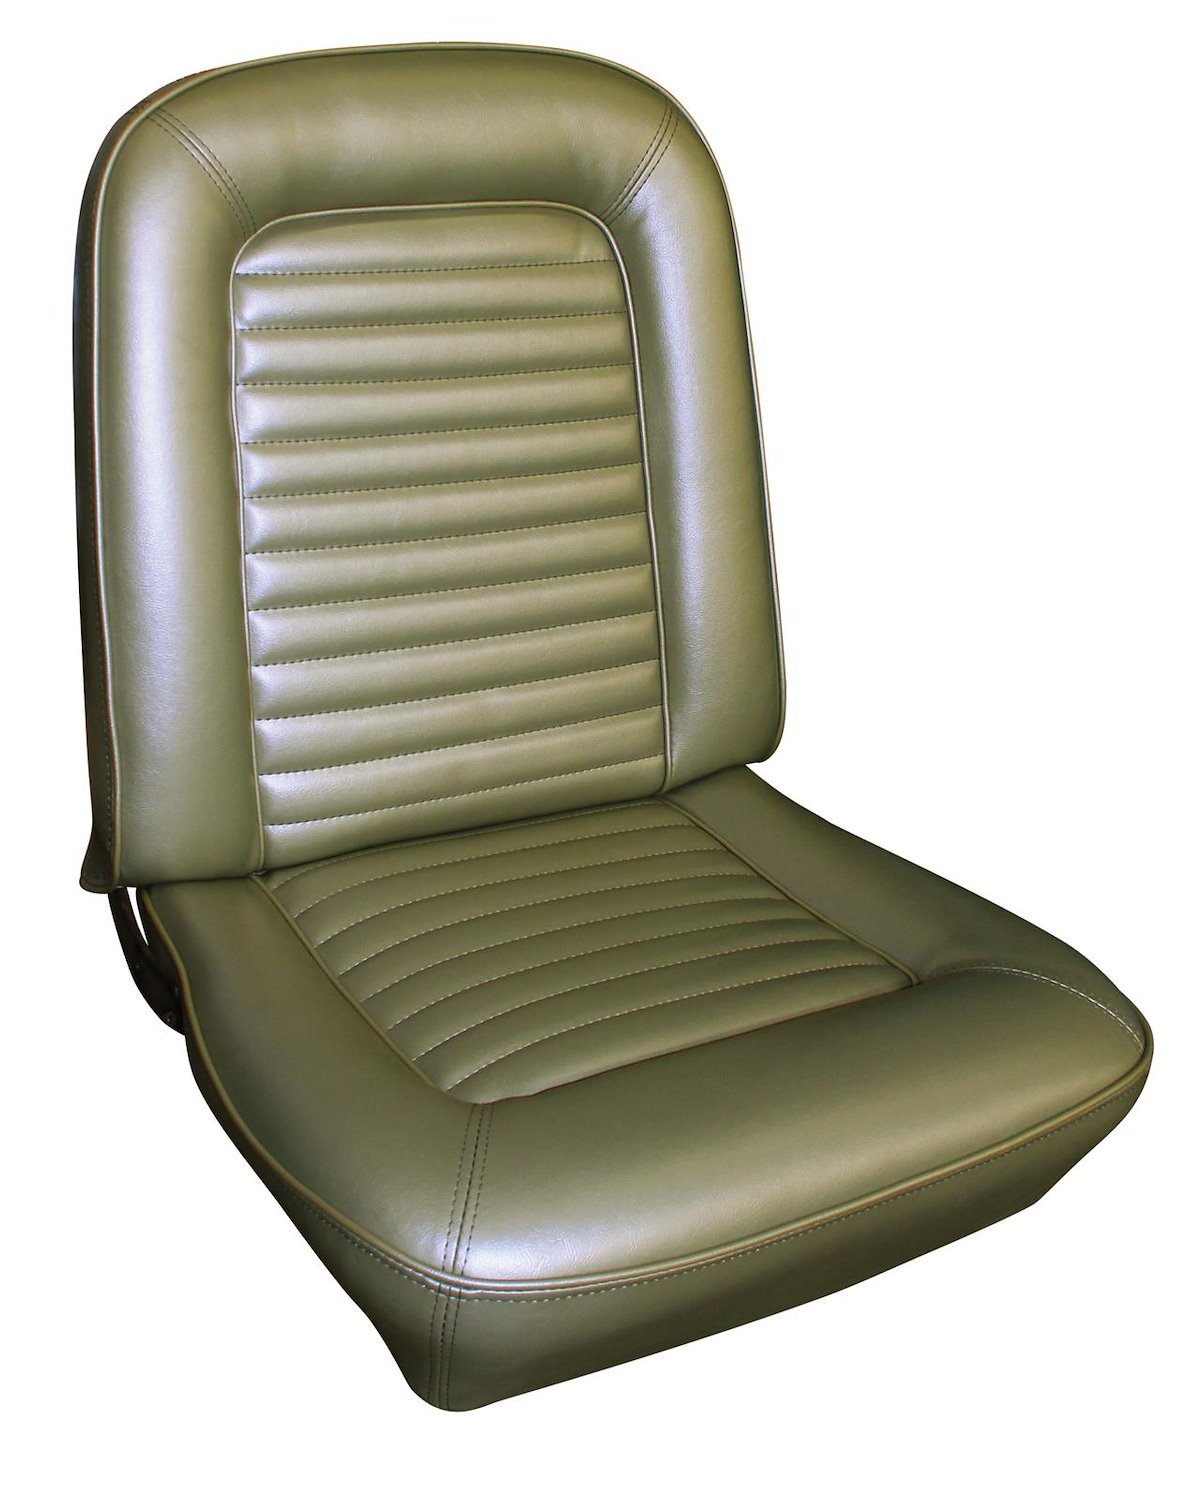 1968 Ford Mustang Fastback Deluxe Interior Front Bench